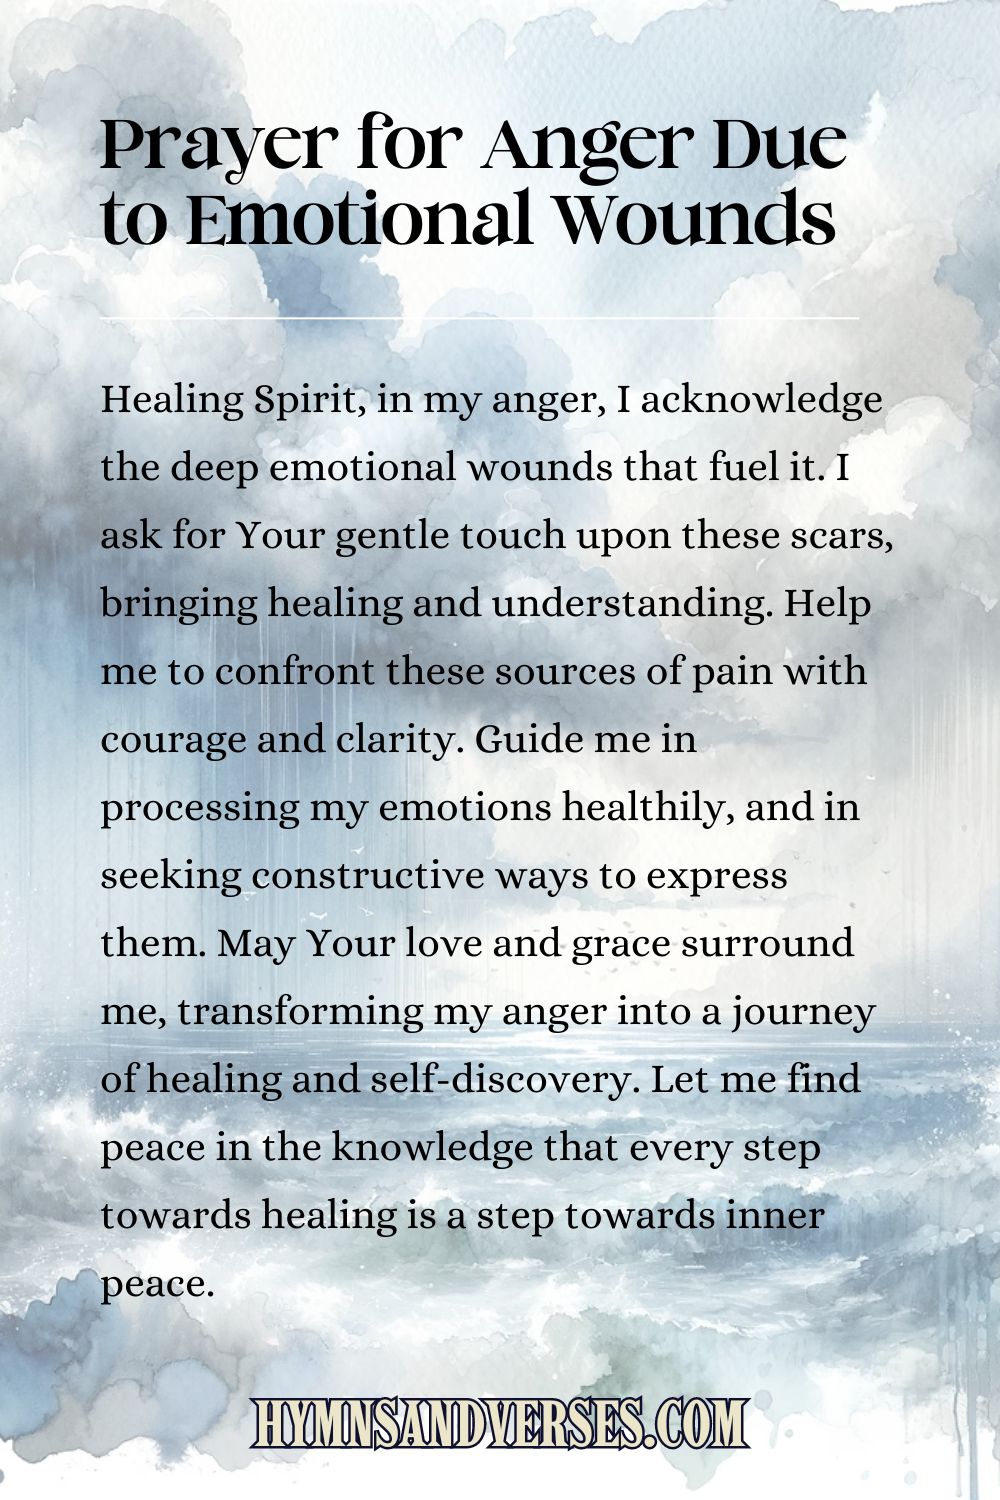 Pin image for prayer, reads: Healing Spirit, in my anger, I acknowledge the deep emotional wounds that fuel it. I ask for Your gentle touch upon these scars, bringing healing and understanding. Help me to confront these sources of pain with courage and clarity. Guide me in processing my emotions healthily, and in seeking constructive ways to express them. May Your love and grace surround me, transforming my anger into a journey of healing and self-discovery. Let me find peace in the knowledge that every step towards healing is a step towards inner peace.